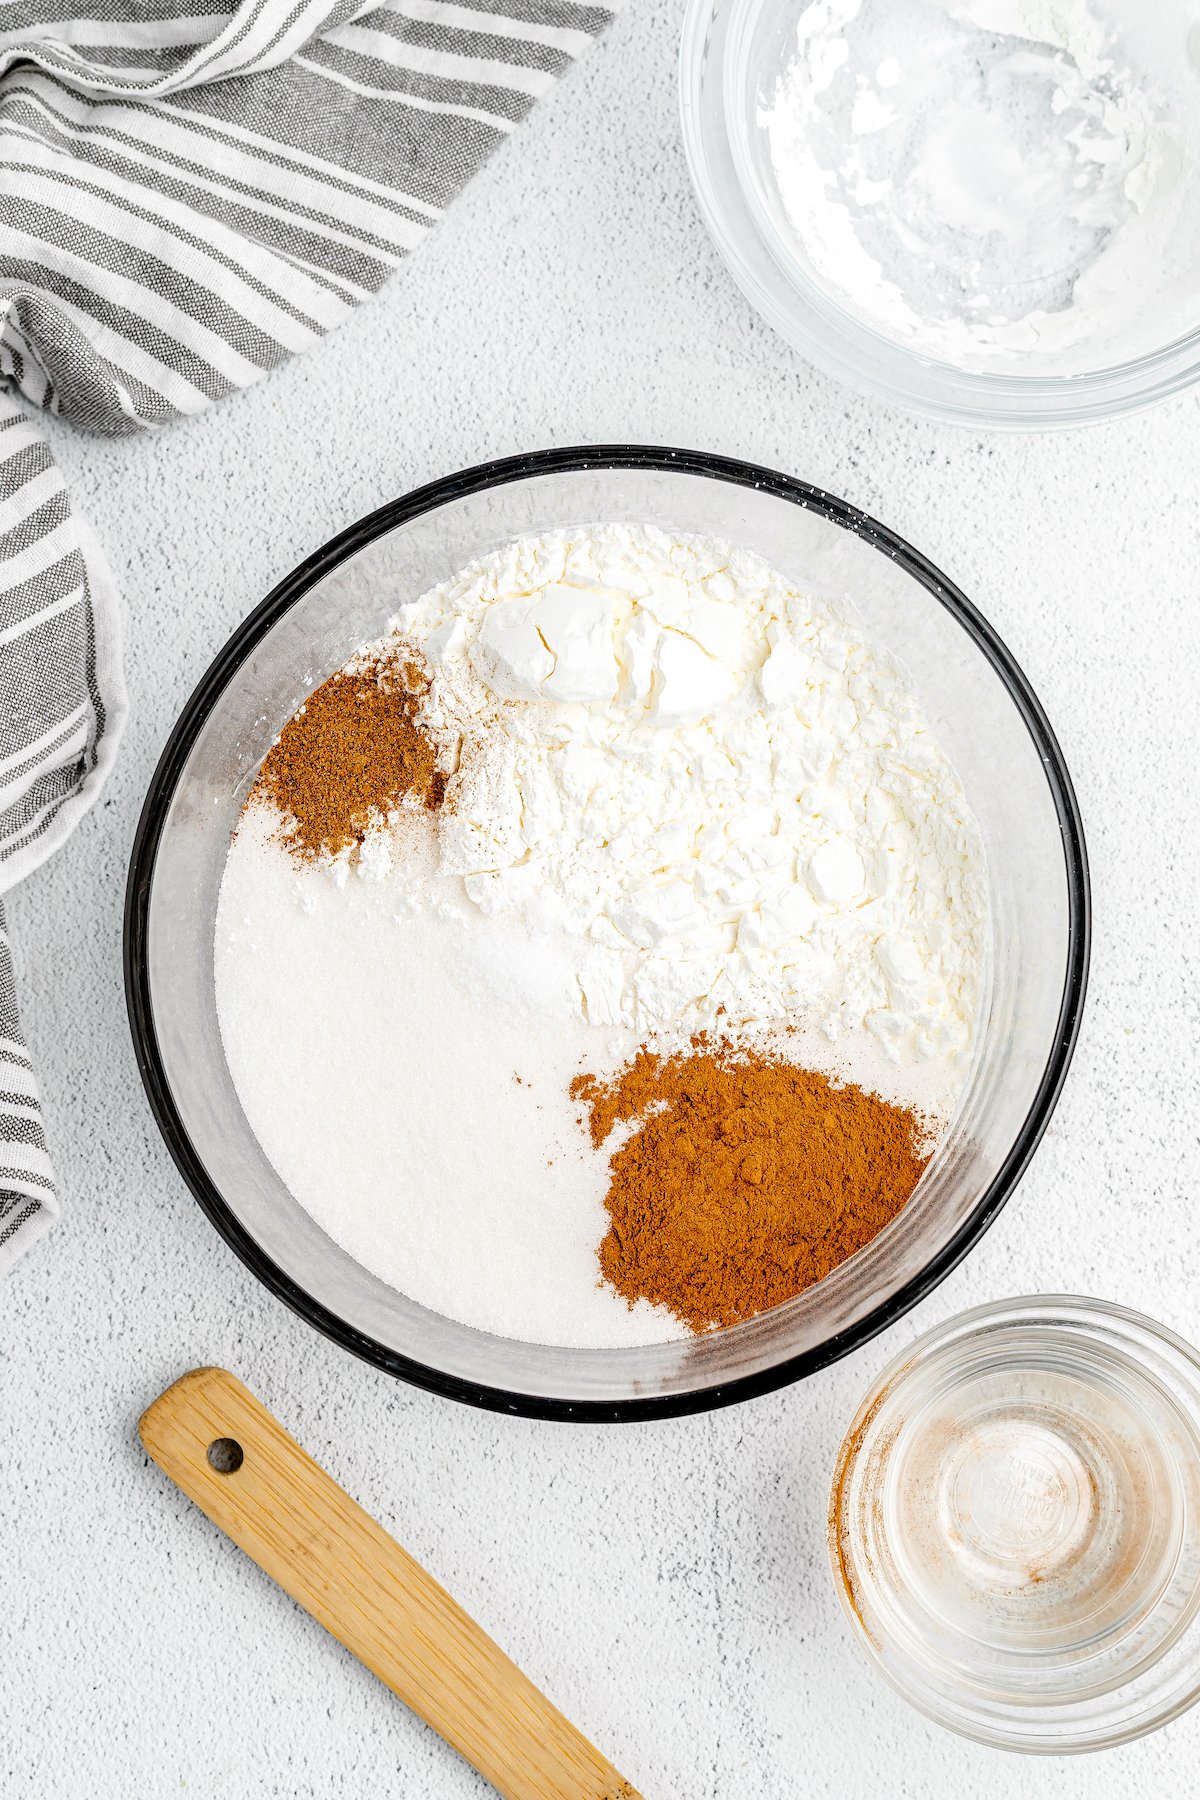 Spices are added to cornstarch in a glass mixing bowl.